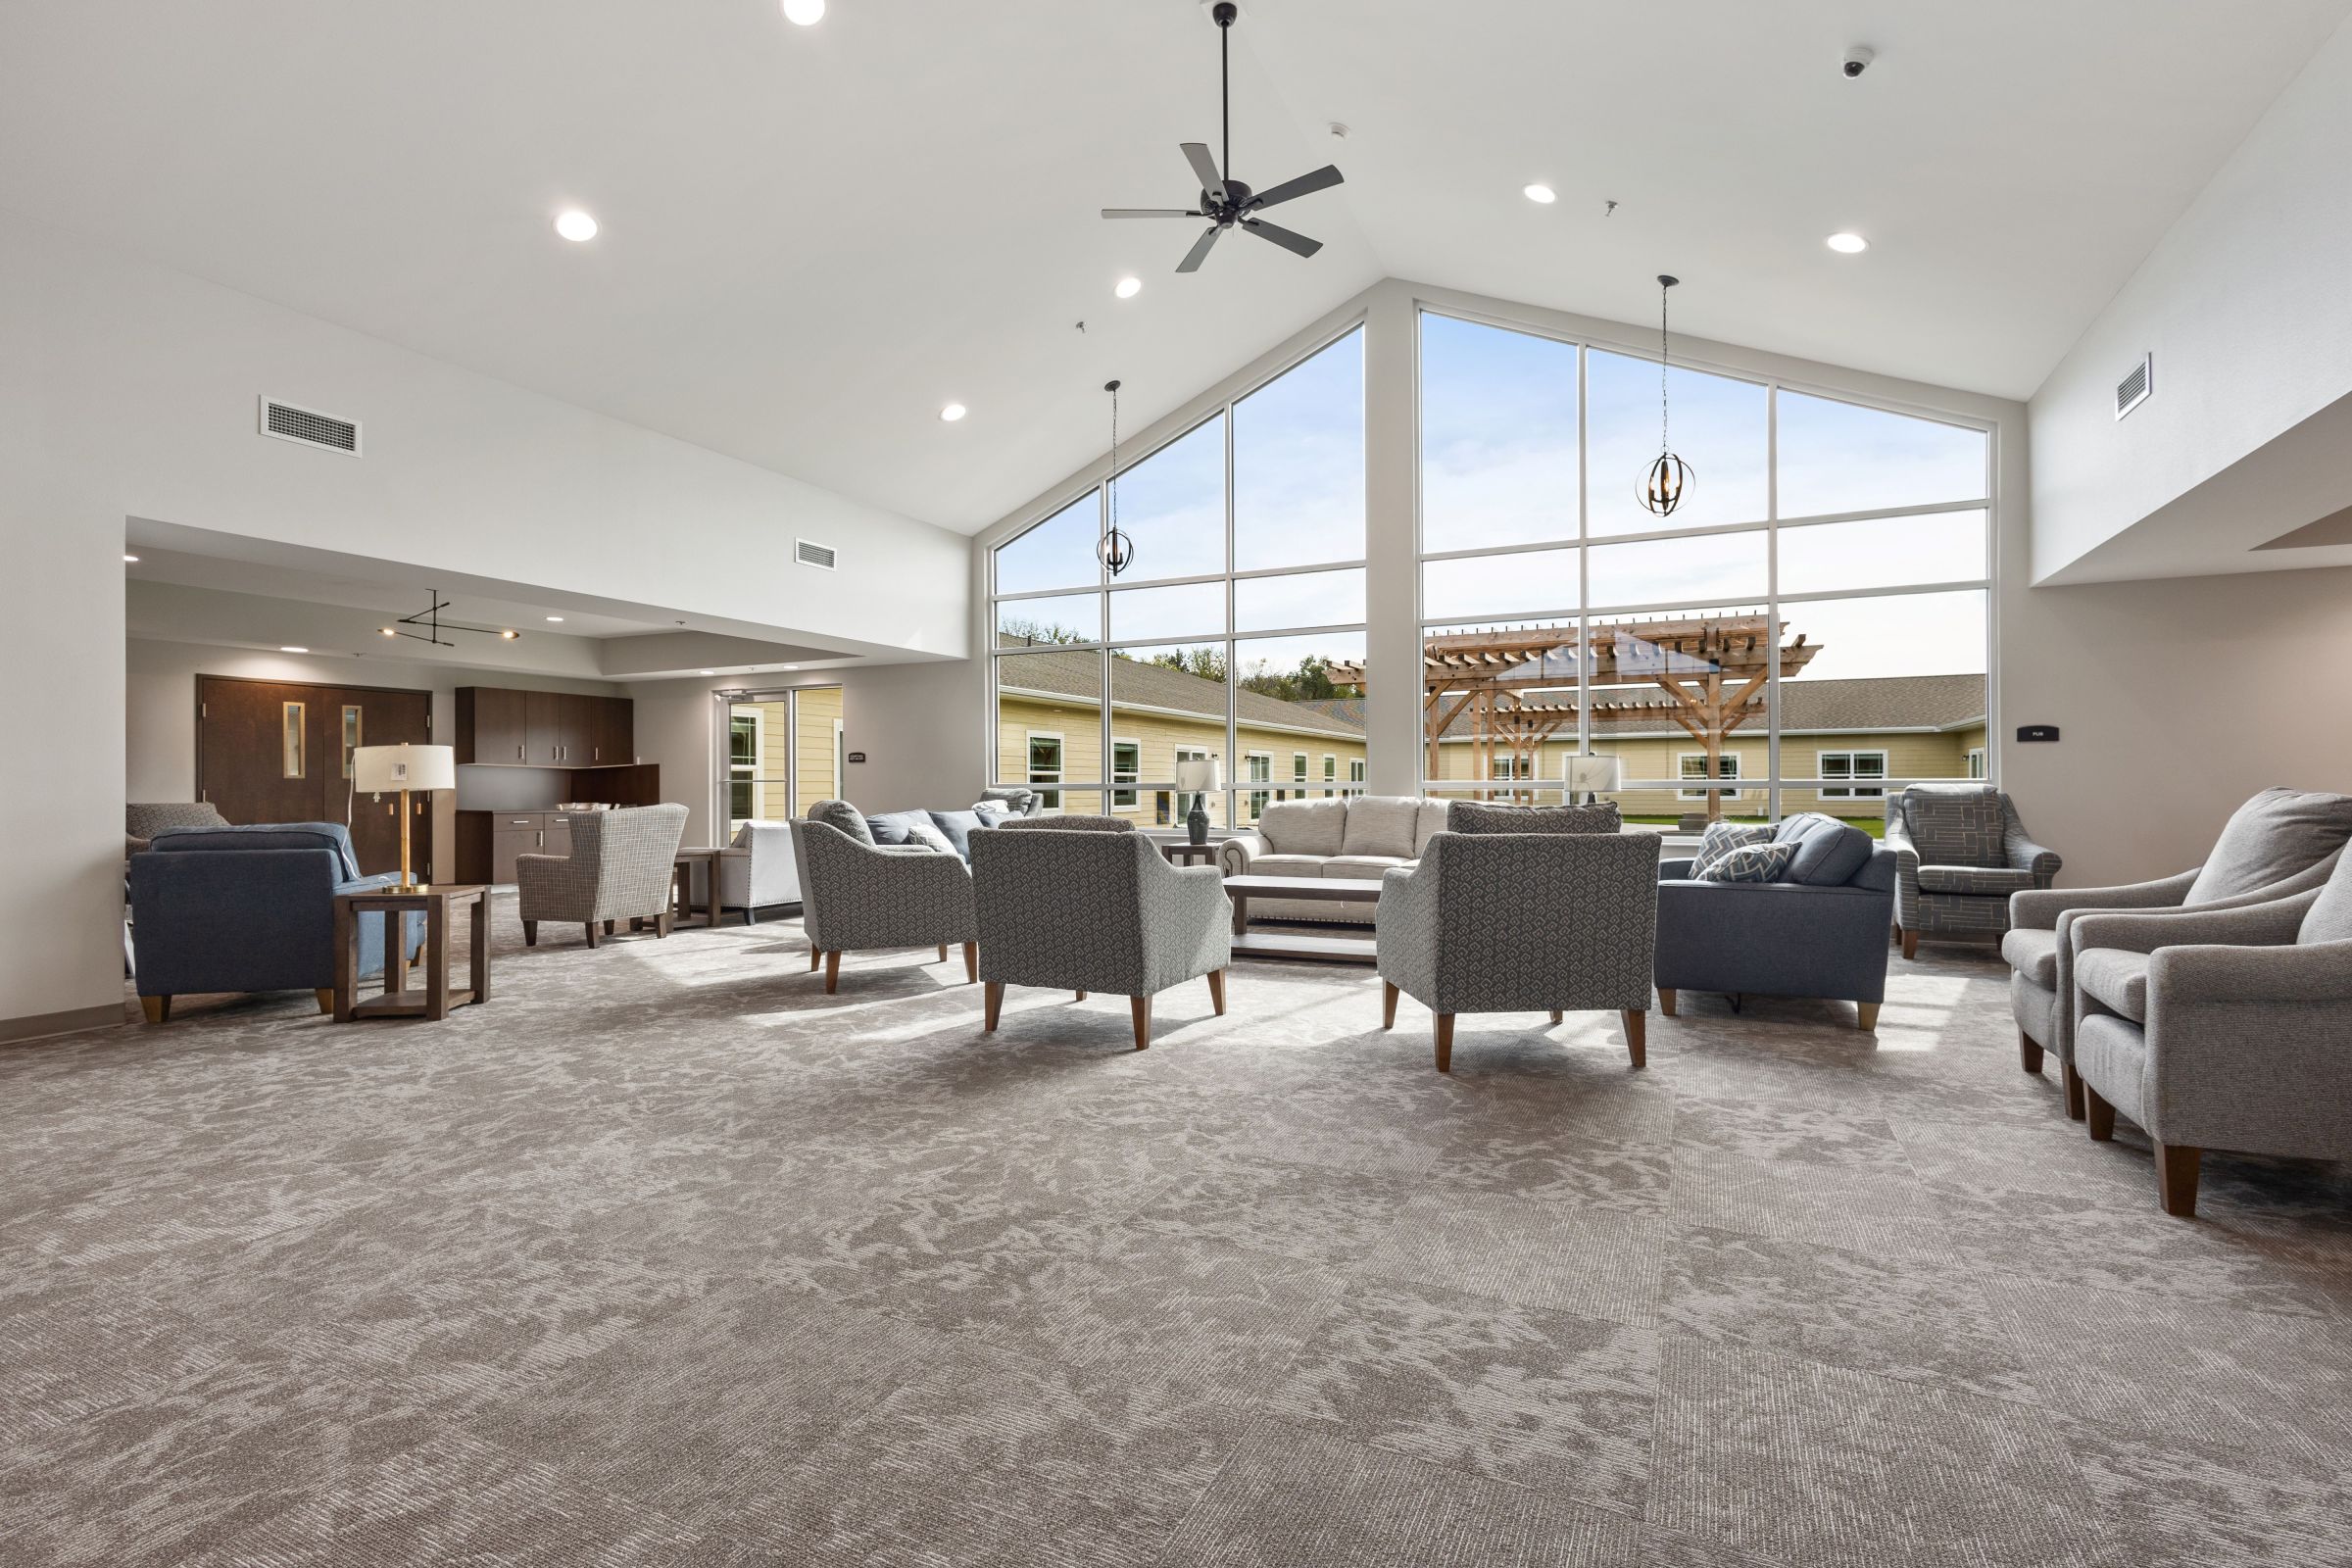 Peaceful Pines Senior Living Opens in Madison With the Help of the REED Fund Photo